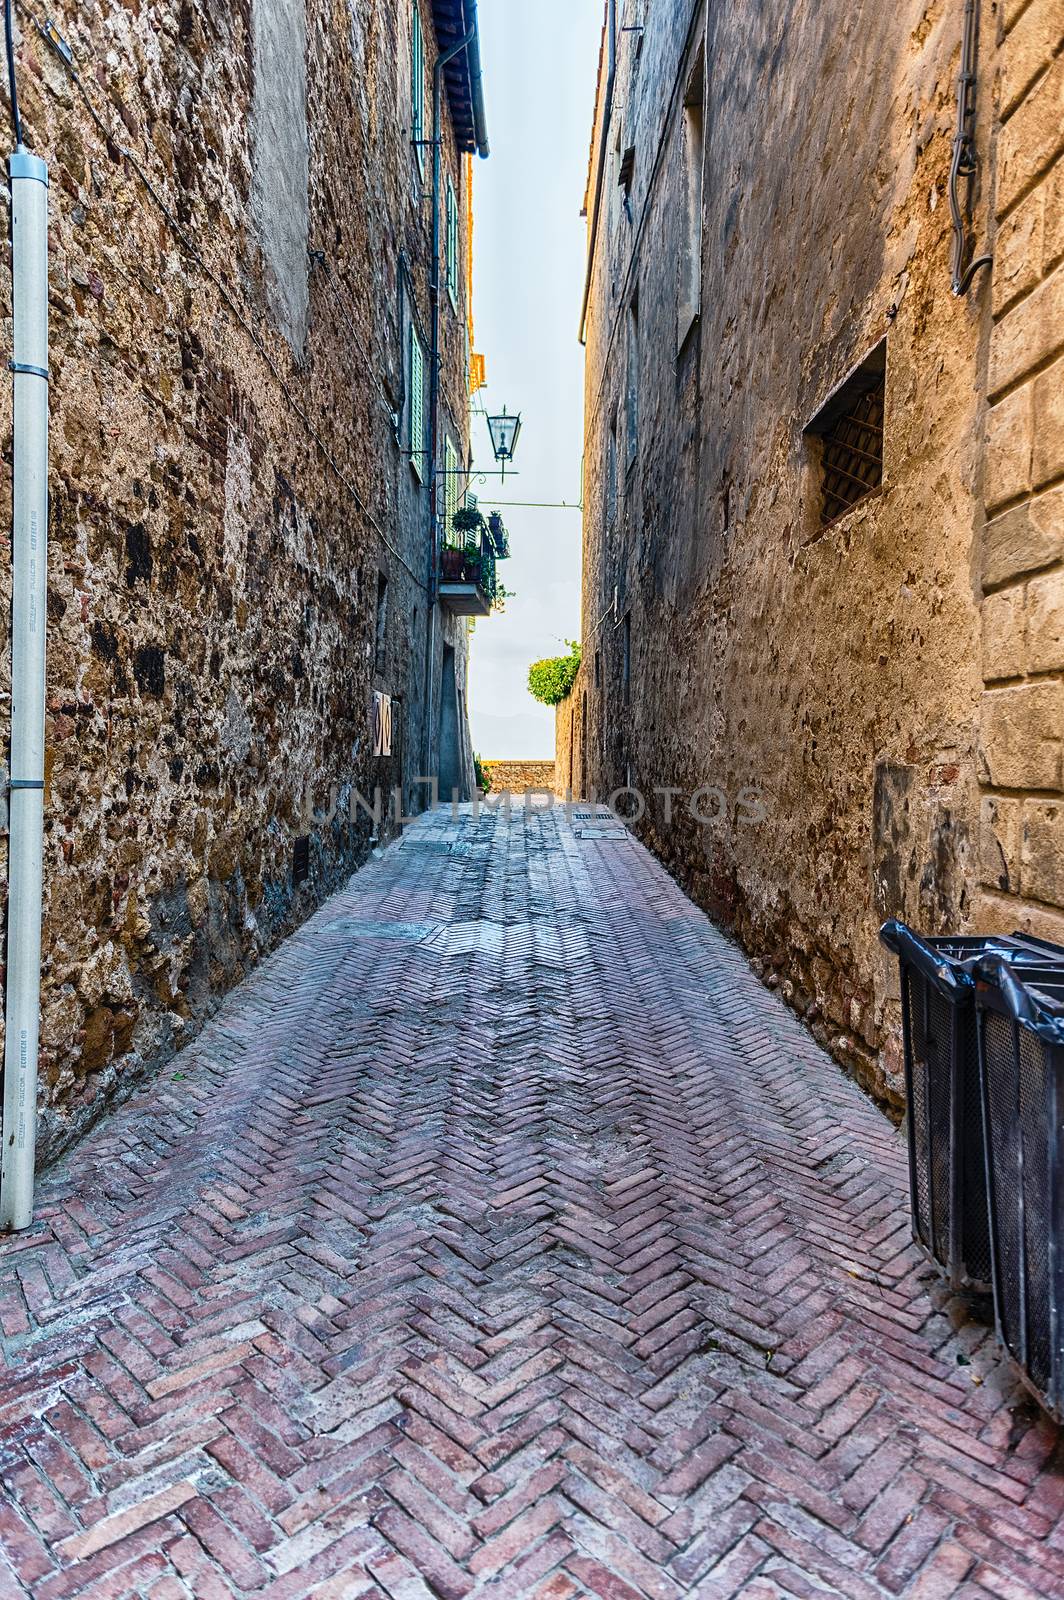 Medieval streets in the town of Pienza, Tuscany, Italy by marcorubino